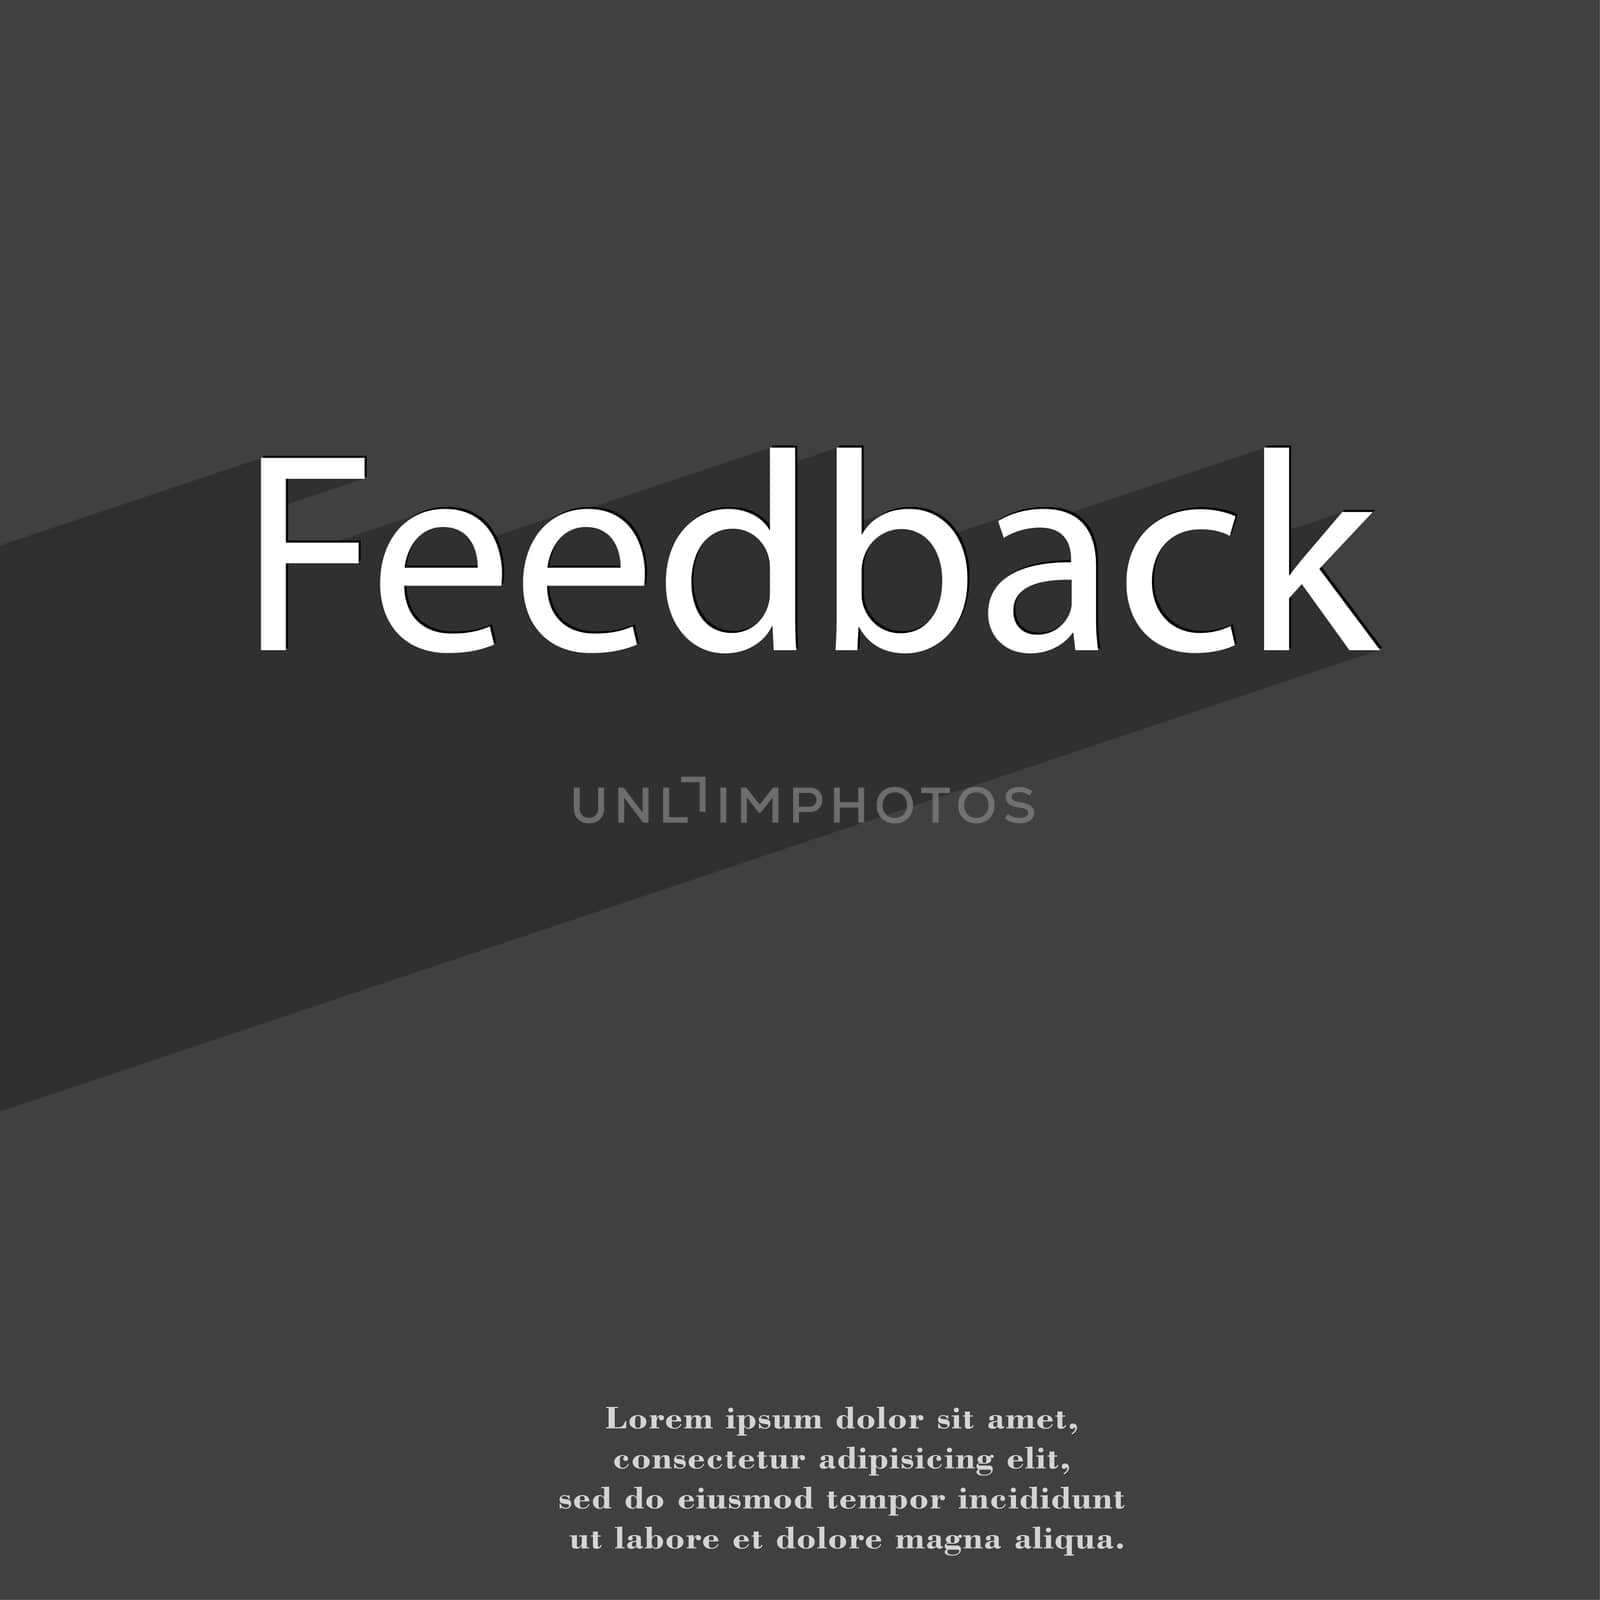 Feedback icon symbol Flat modern web design with long shadow and space for your text. illustration